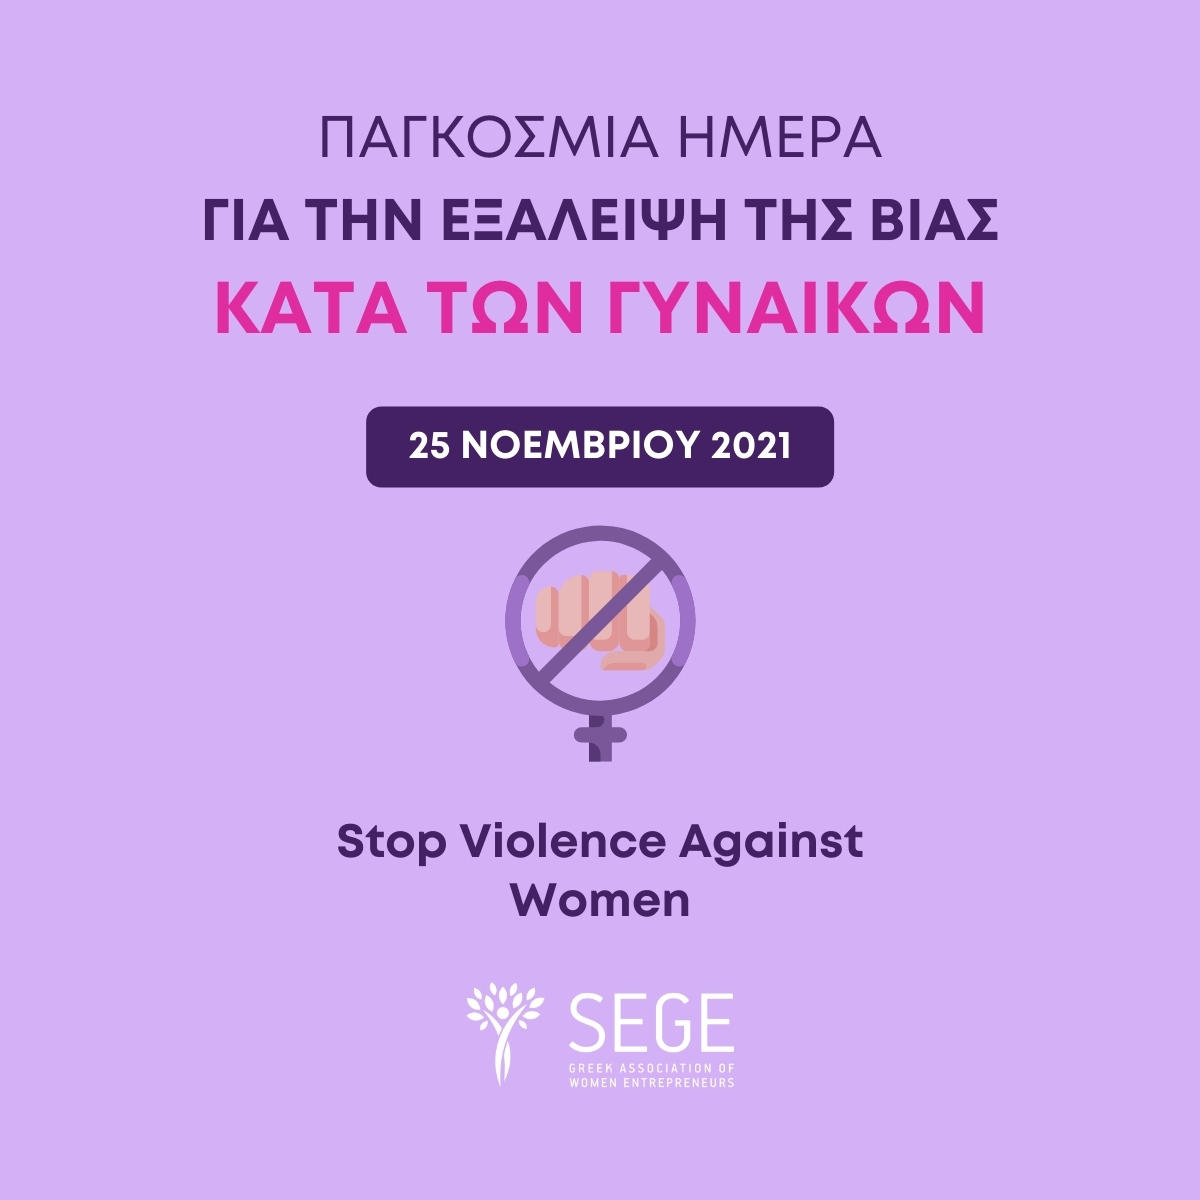 SEGE: Message for the International Day for the Elimination of Violence against Women